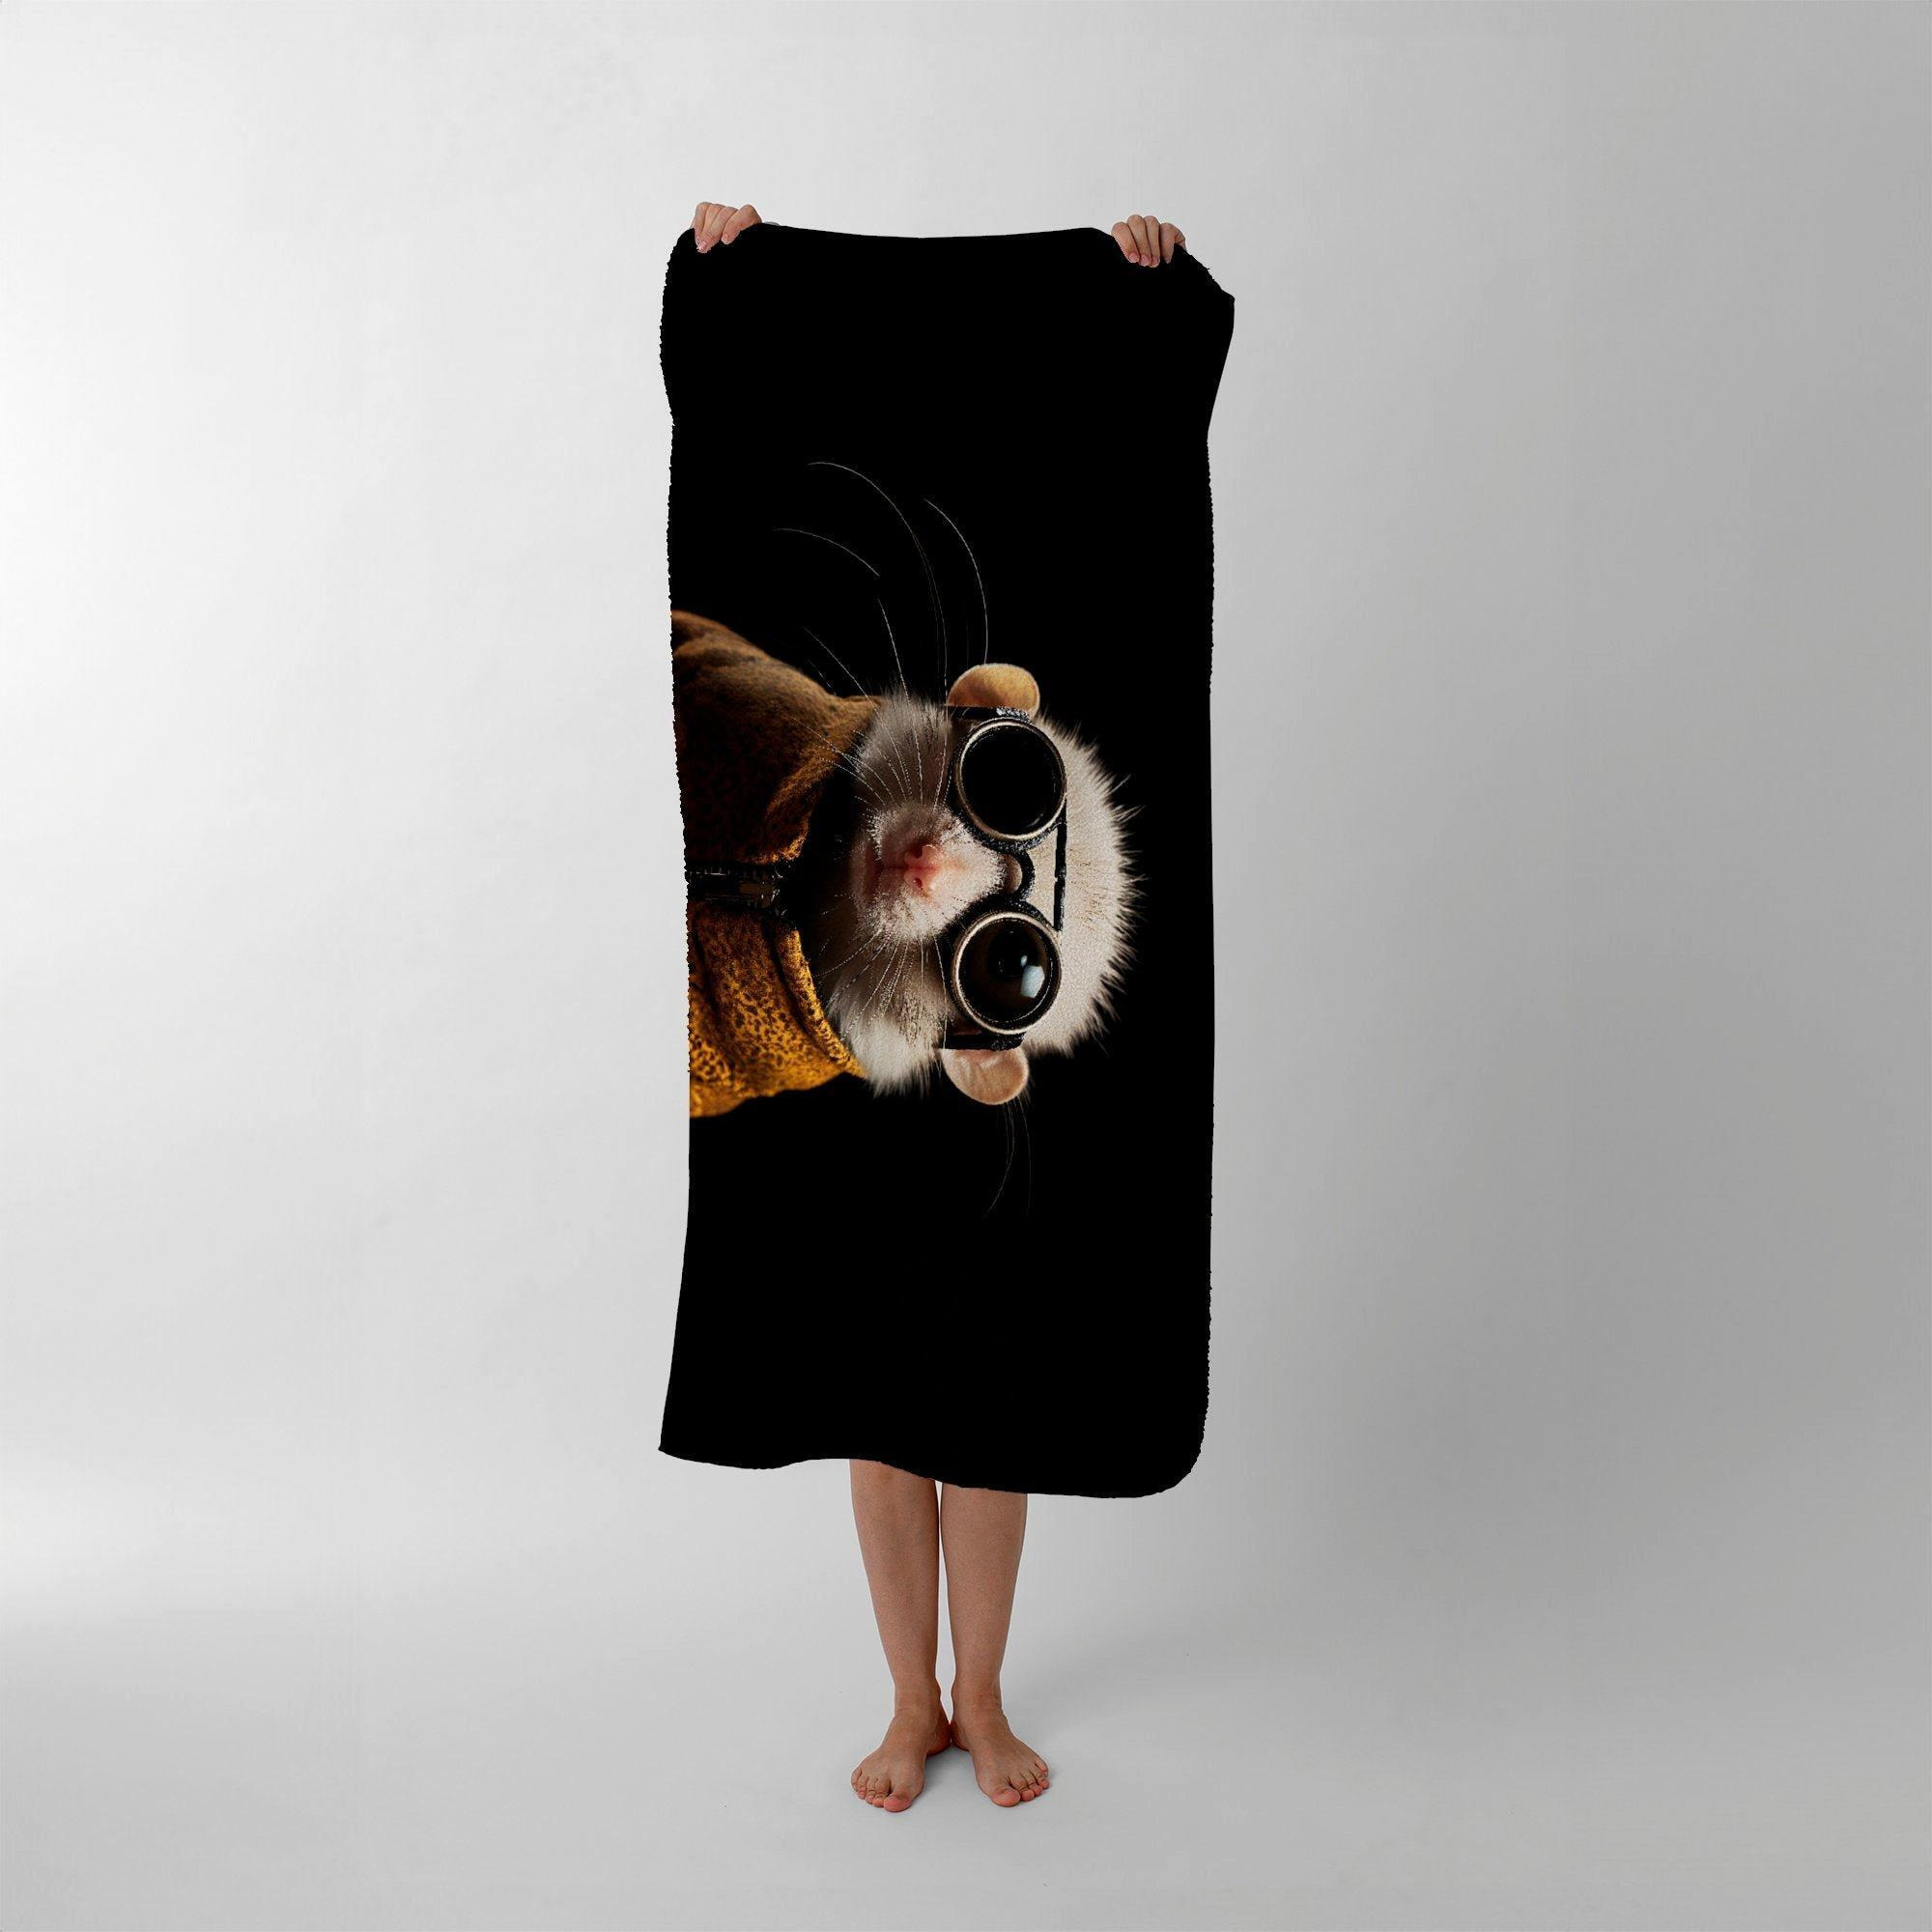 Realistic Doormouse with Glasses Beach Towel - image 1